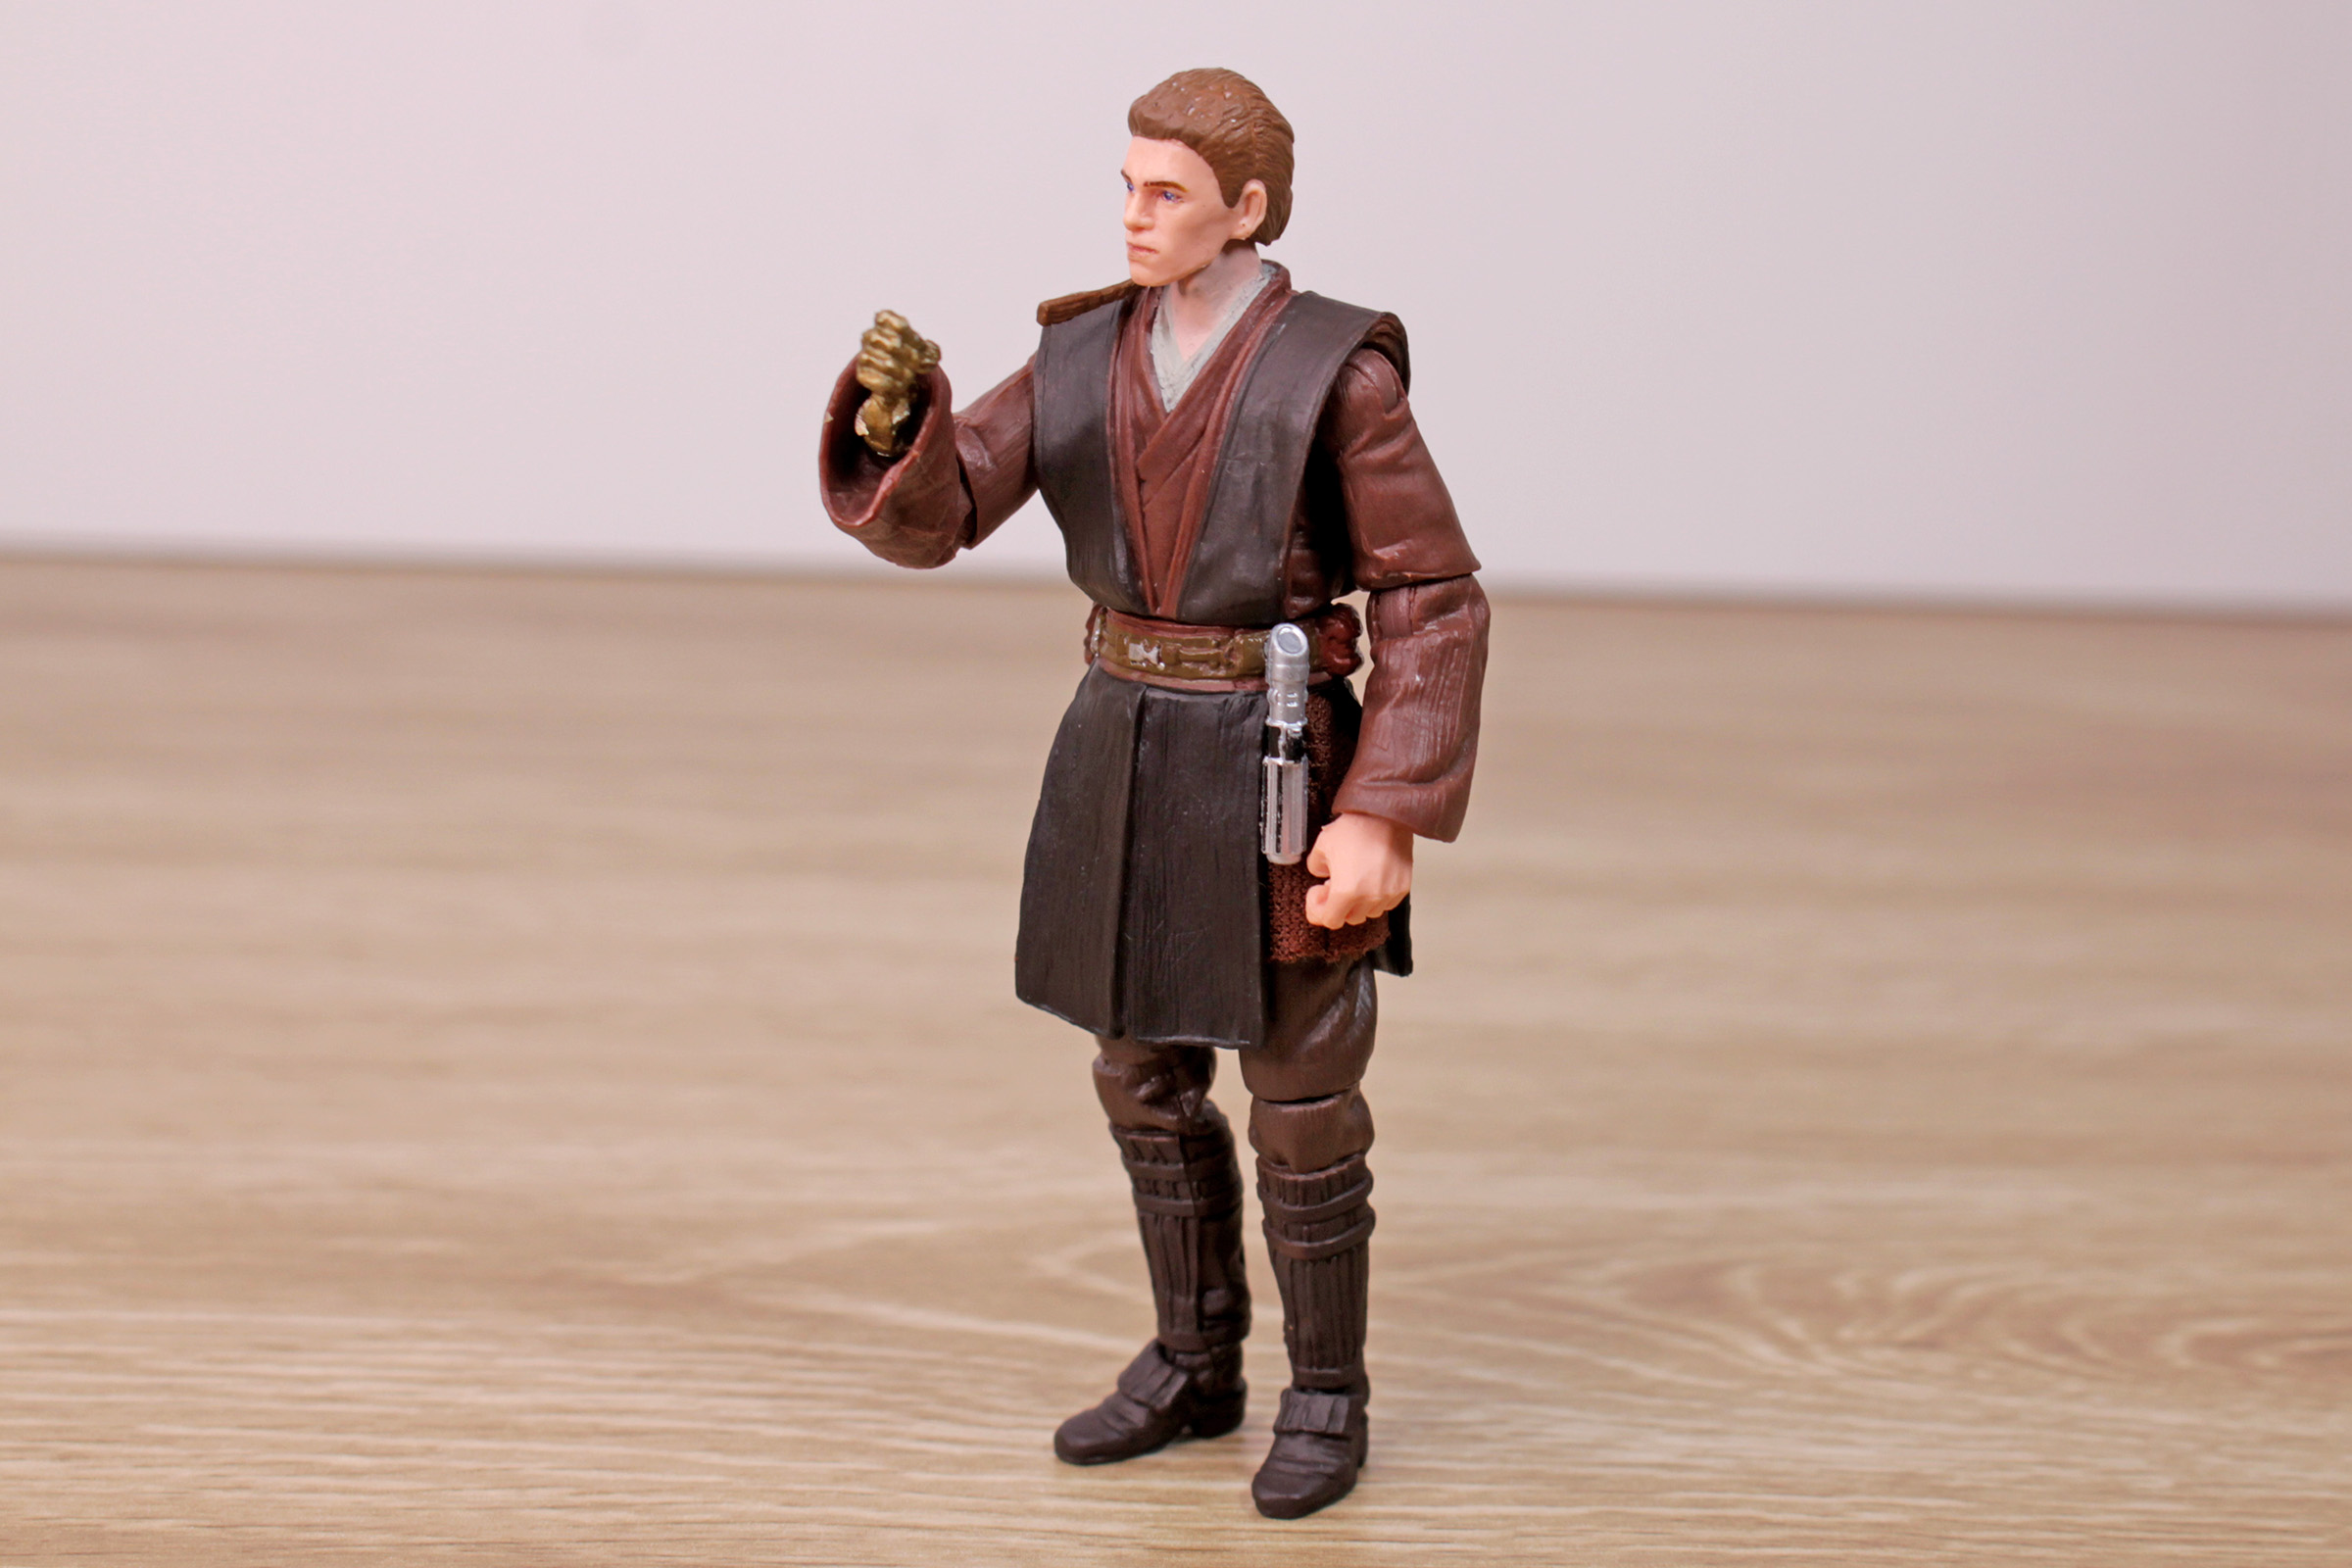 The Vintage Collection Anakin Skywalker (Padawan) VC244